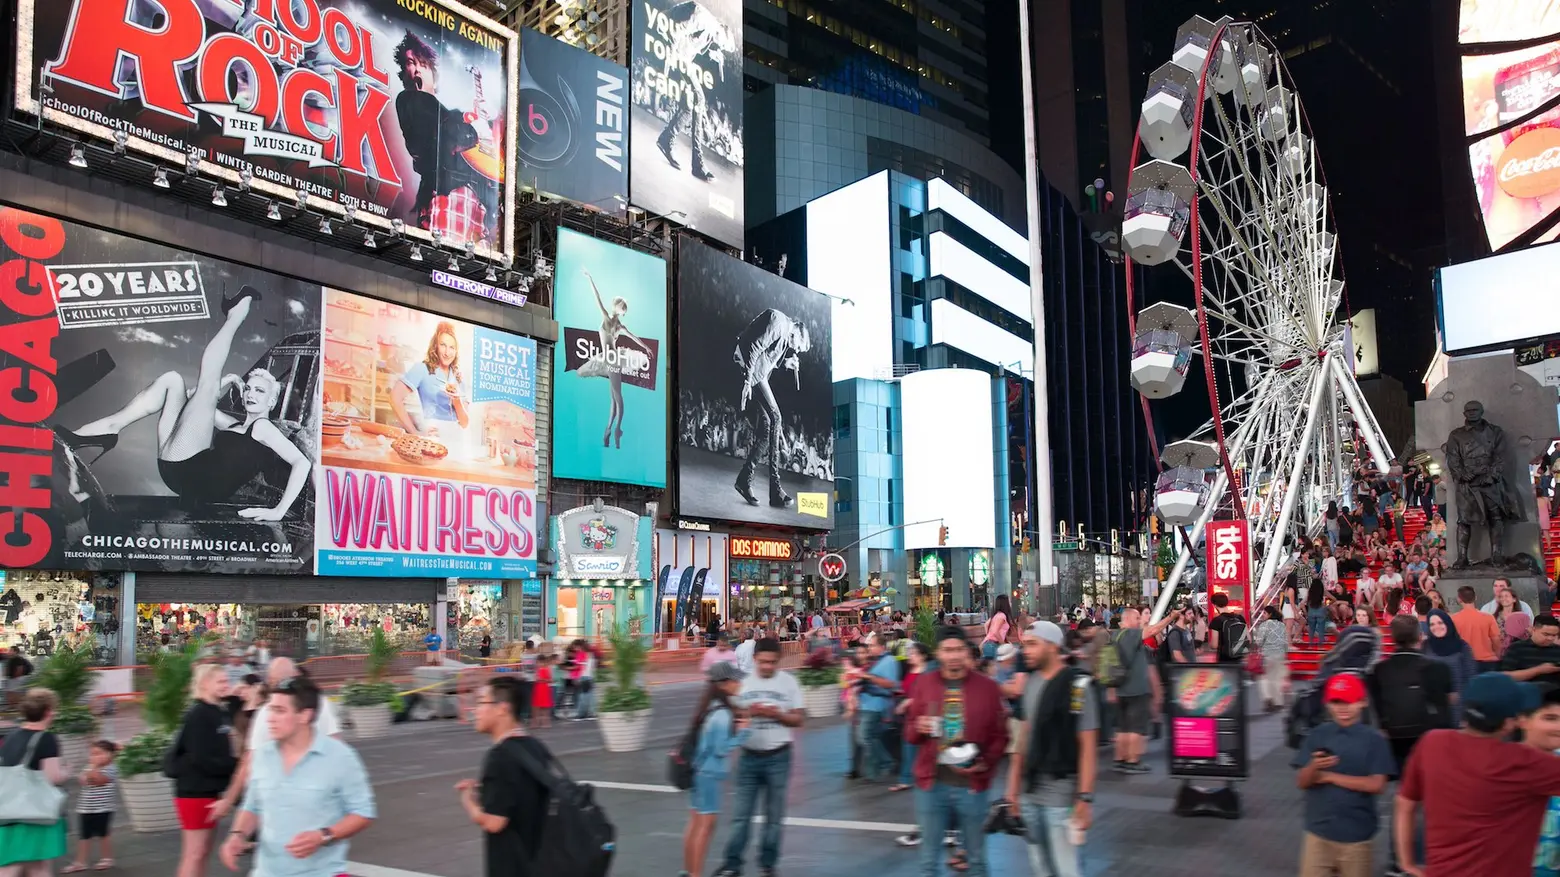 You can ride an 11-story Ferris wheel in the middle of Times Square